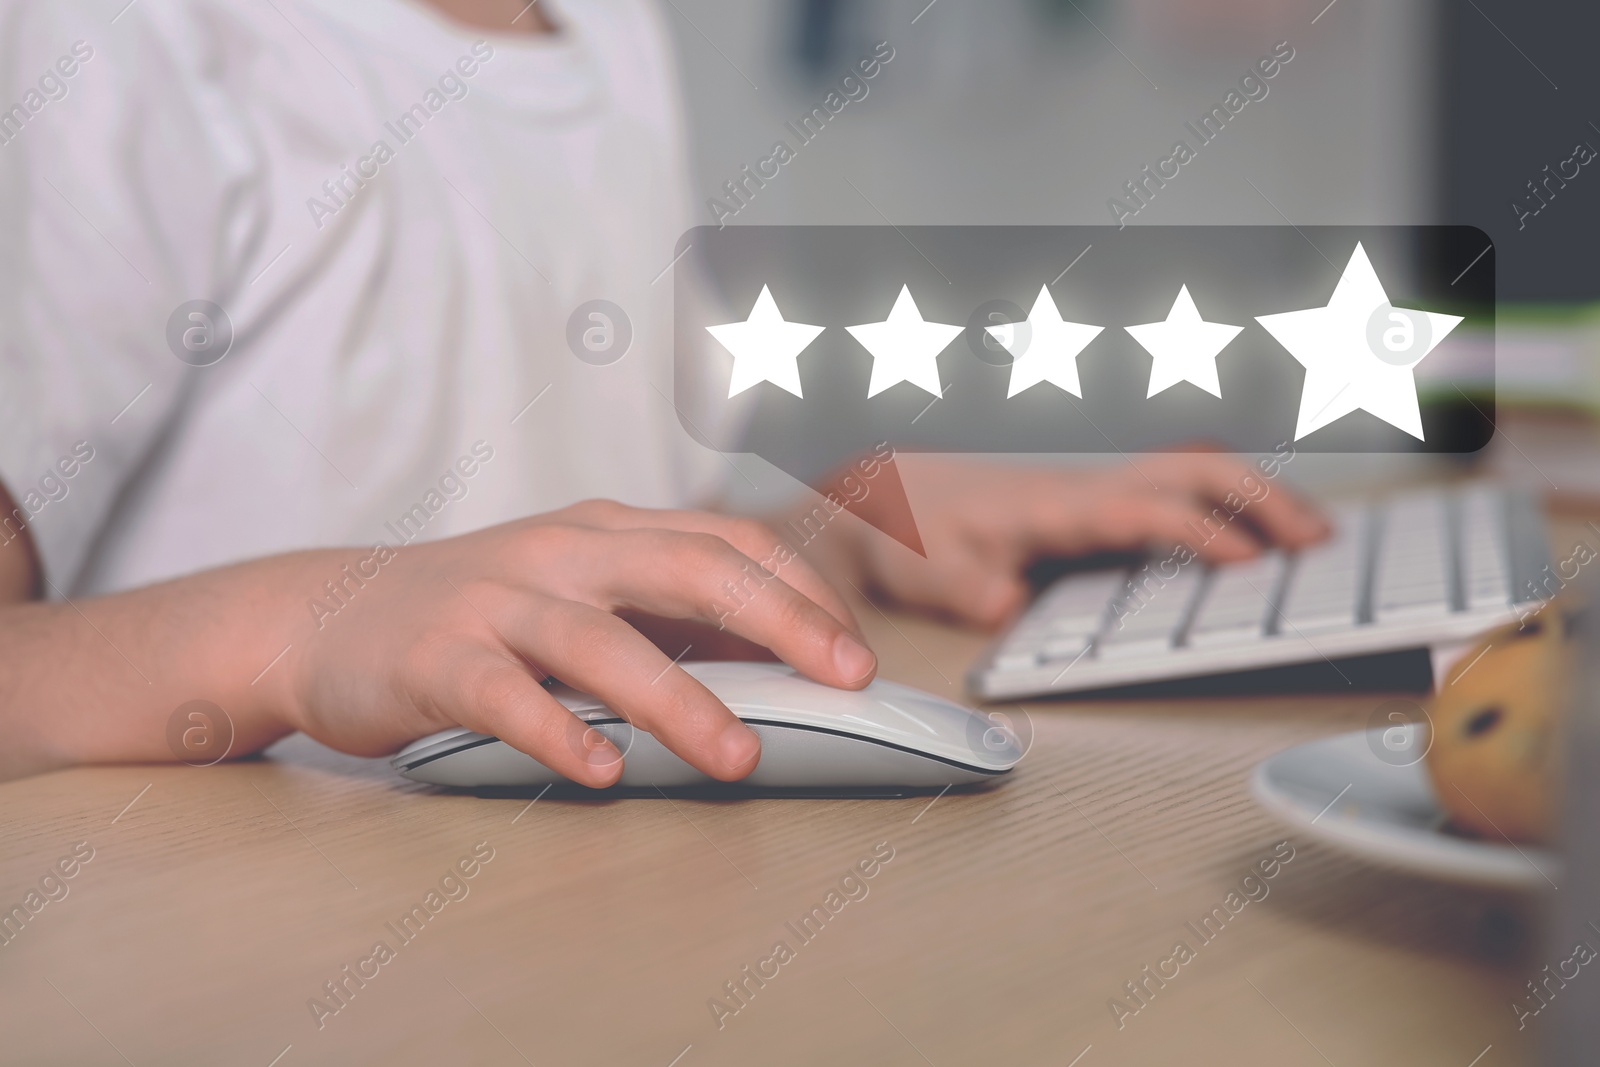 Image of Woman leaving service feedback using laptop at table, closeup. Stars near device